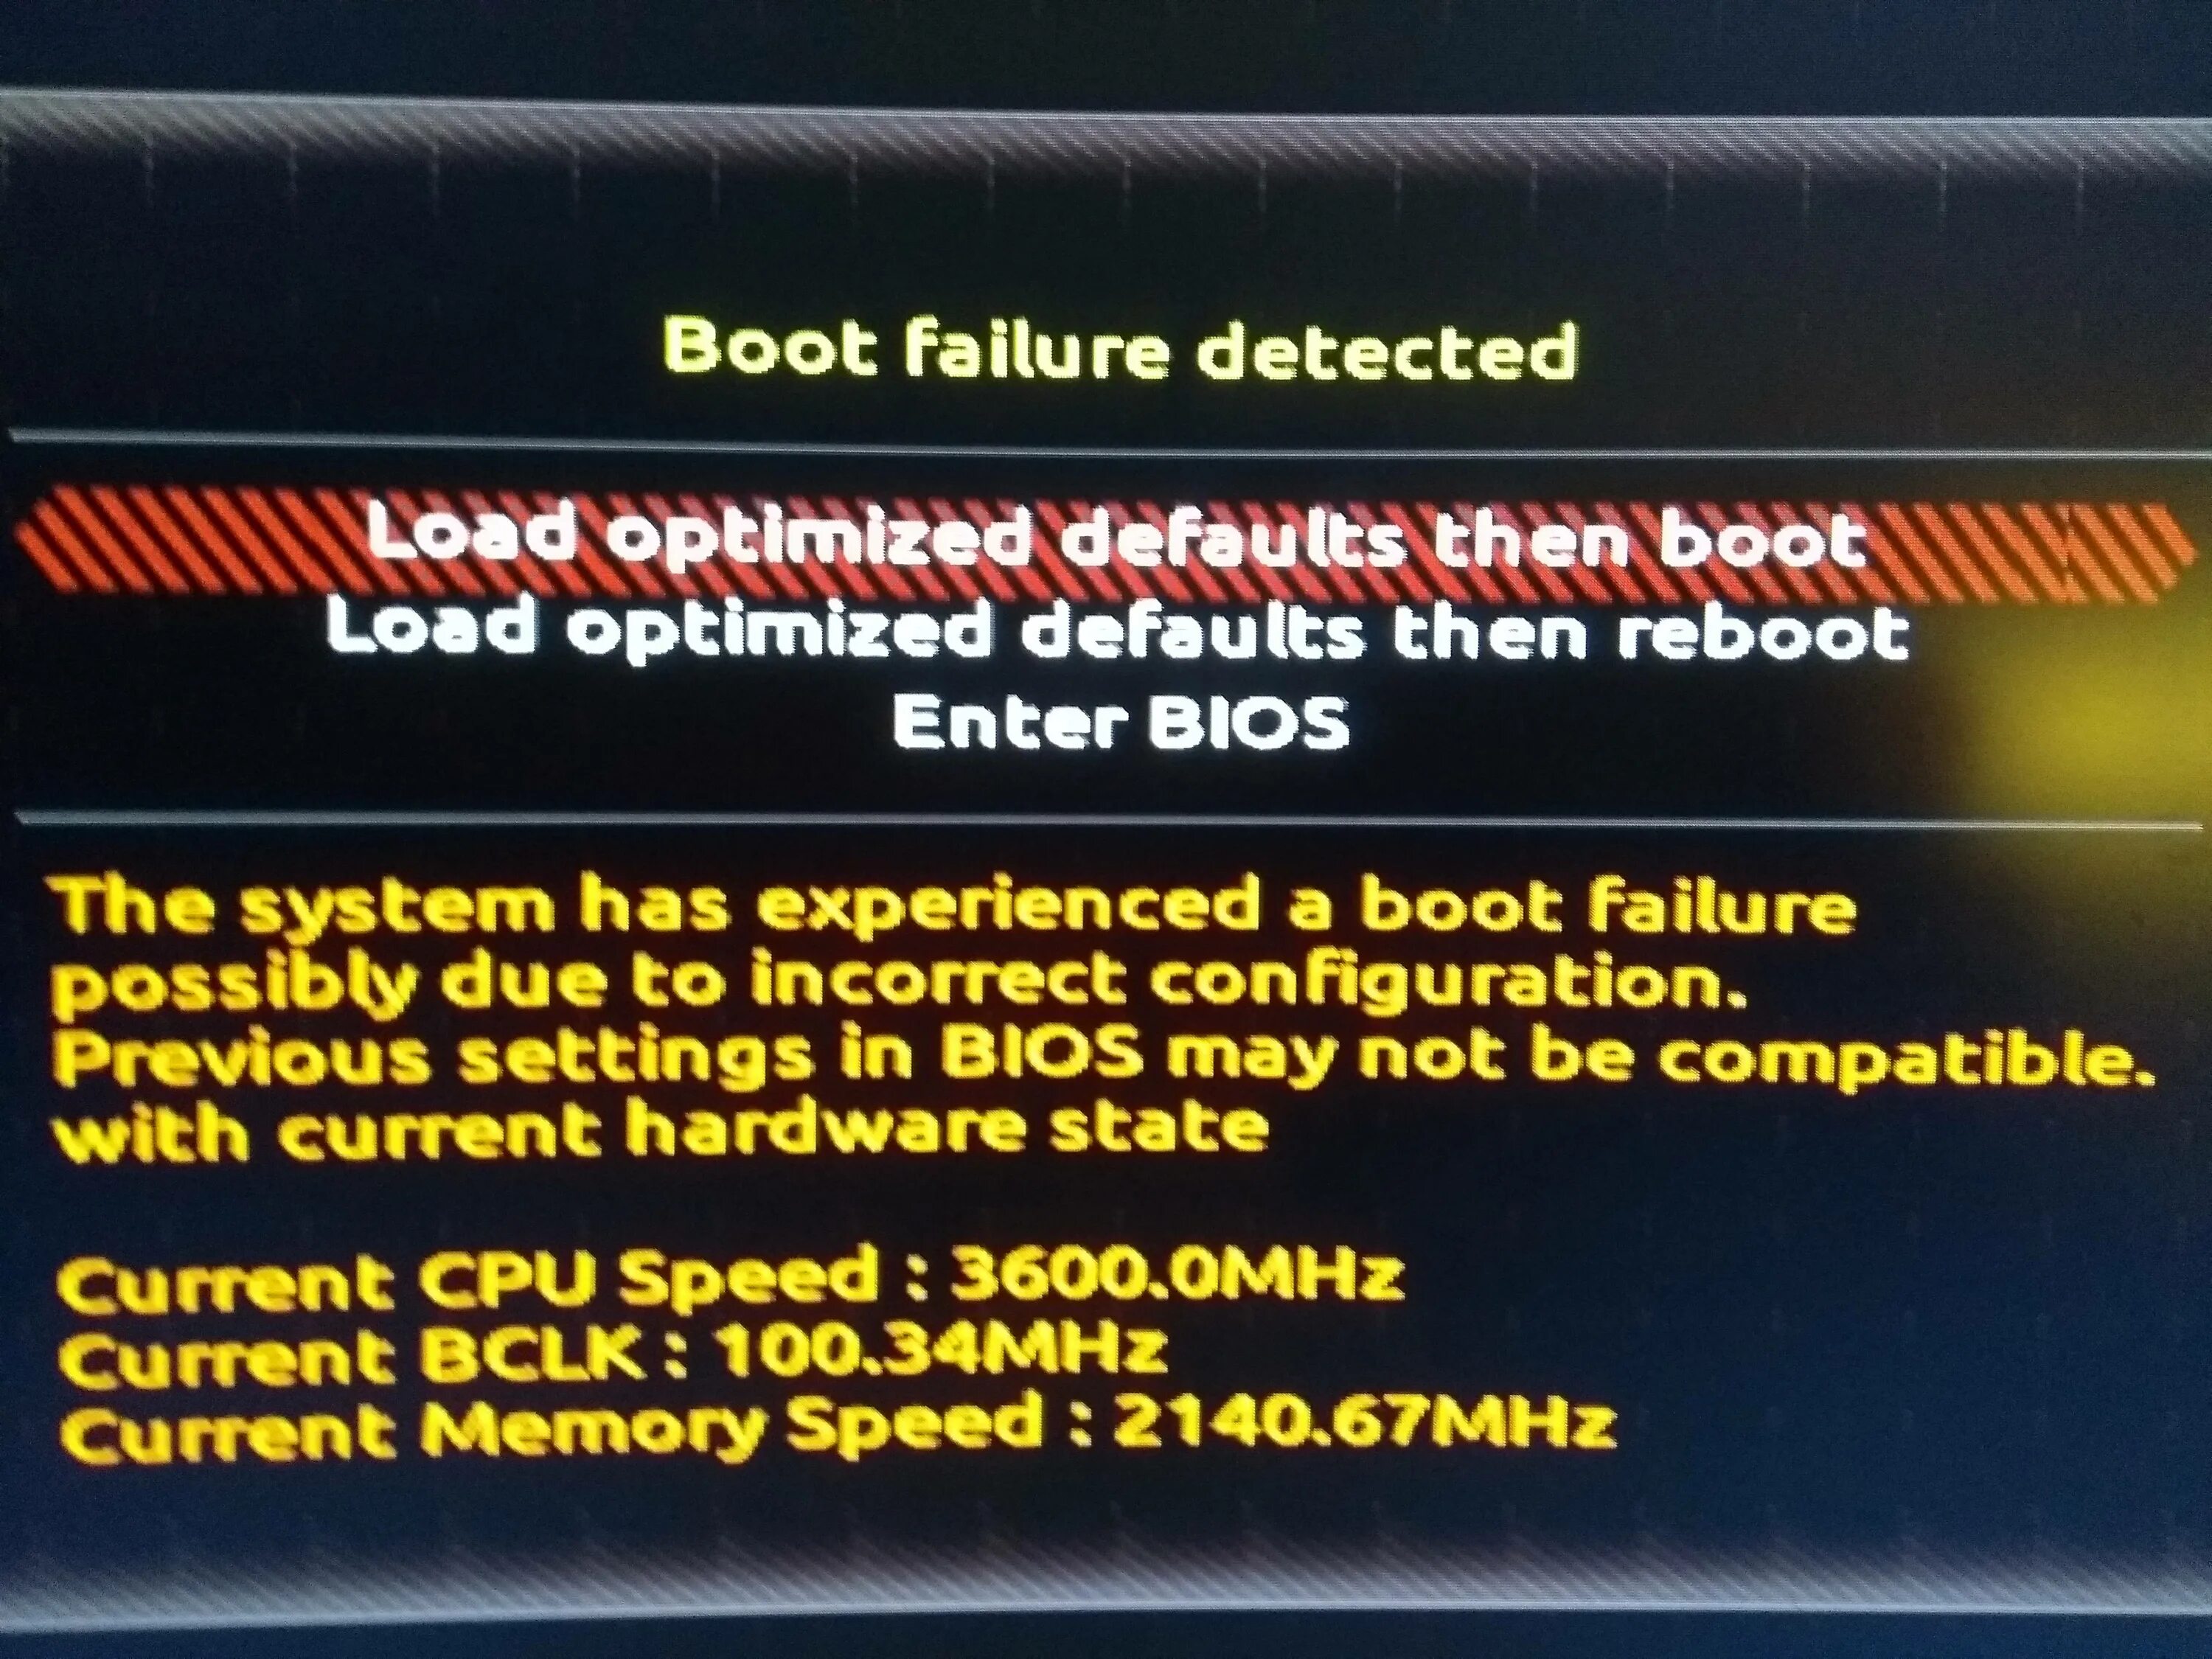 Boot failure detected. Boot failure detected Gigabyte. The System has experienced a Boot failure possibly due to Incorrect configuration. Boot failure detected что делать. The system has detected